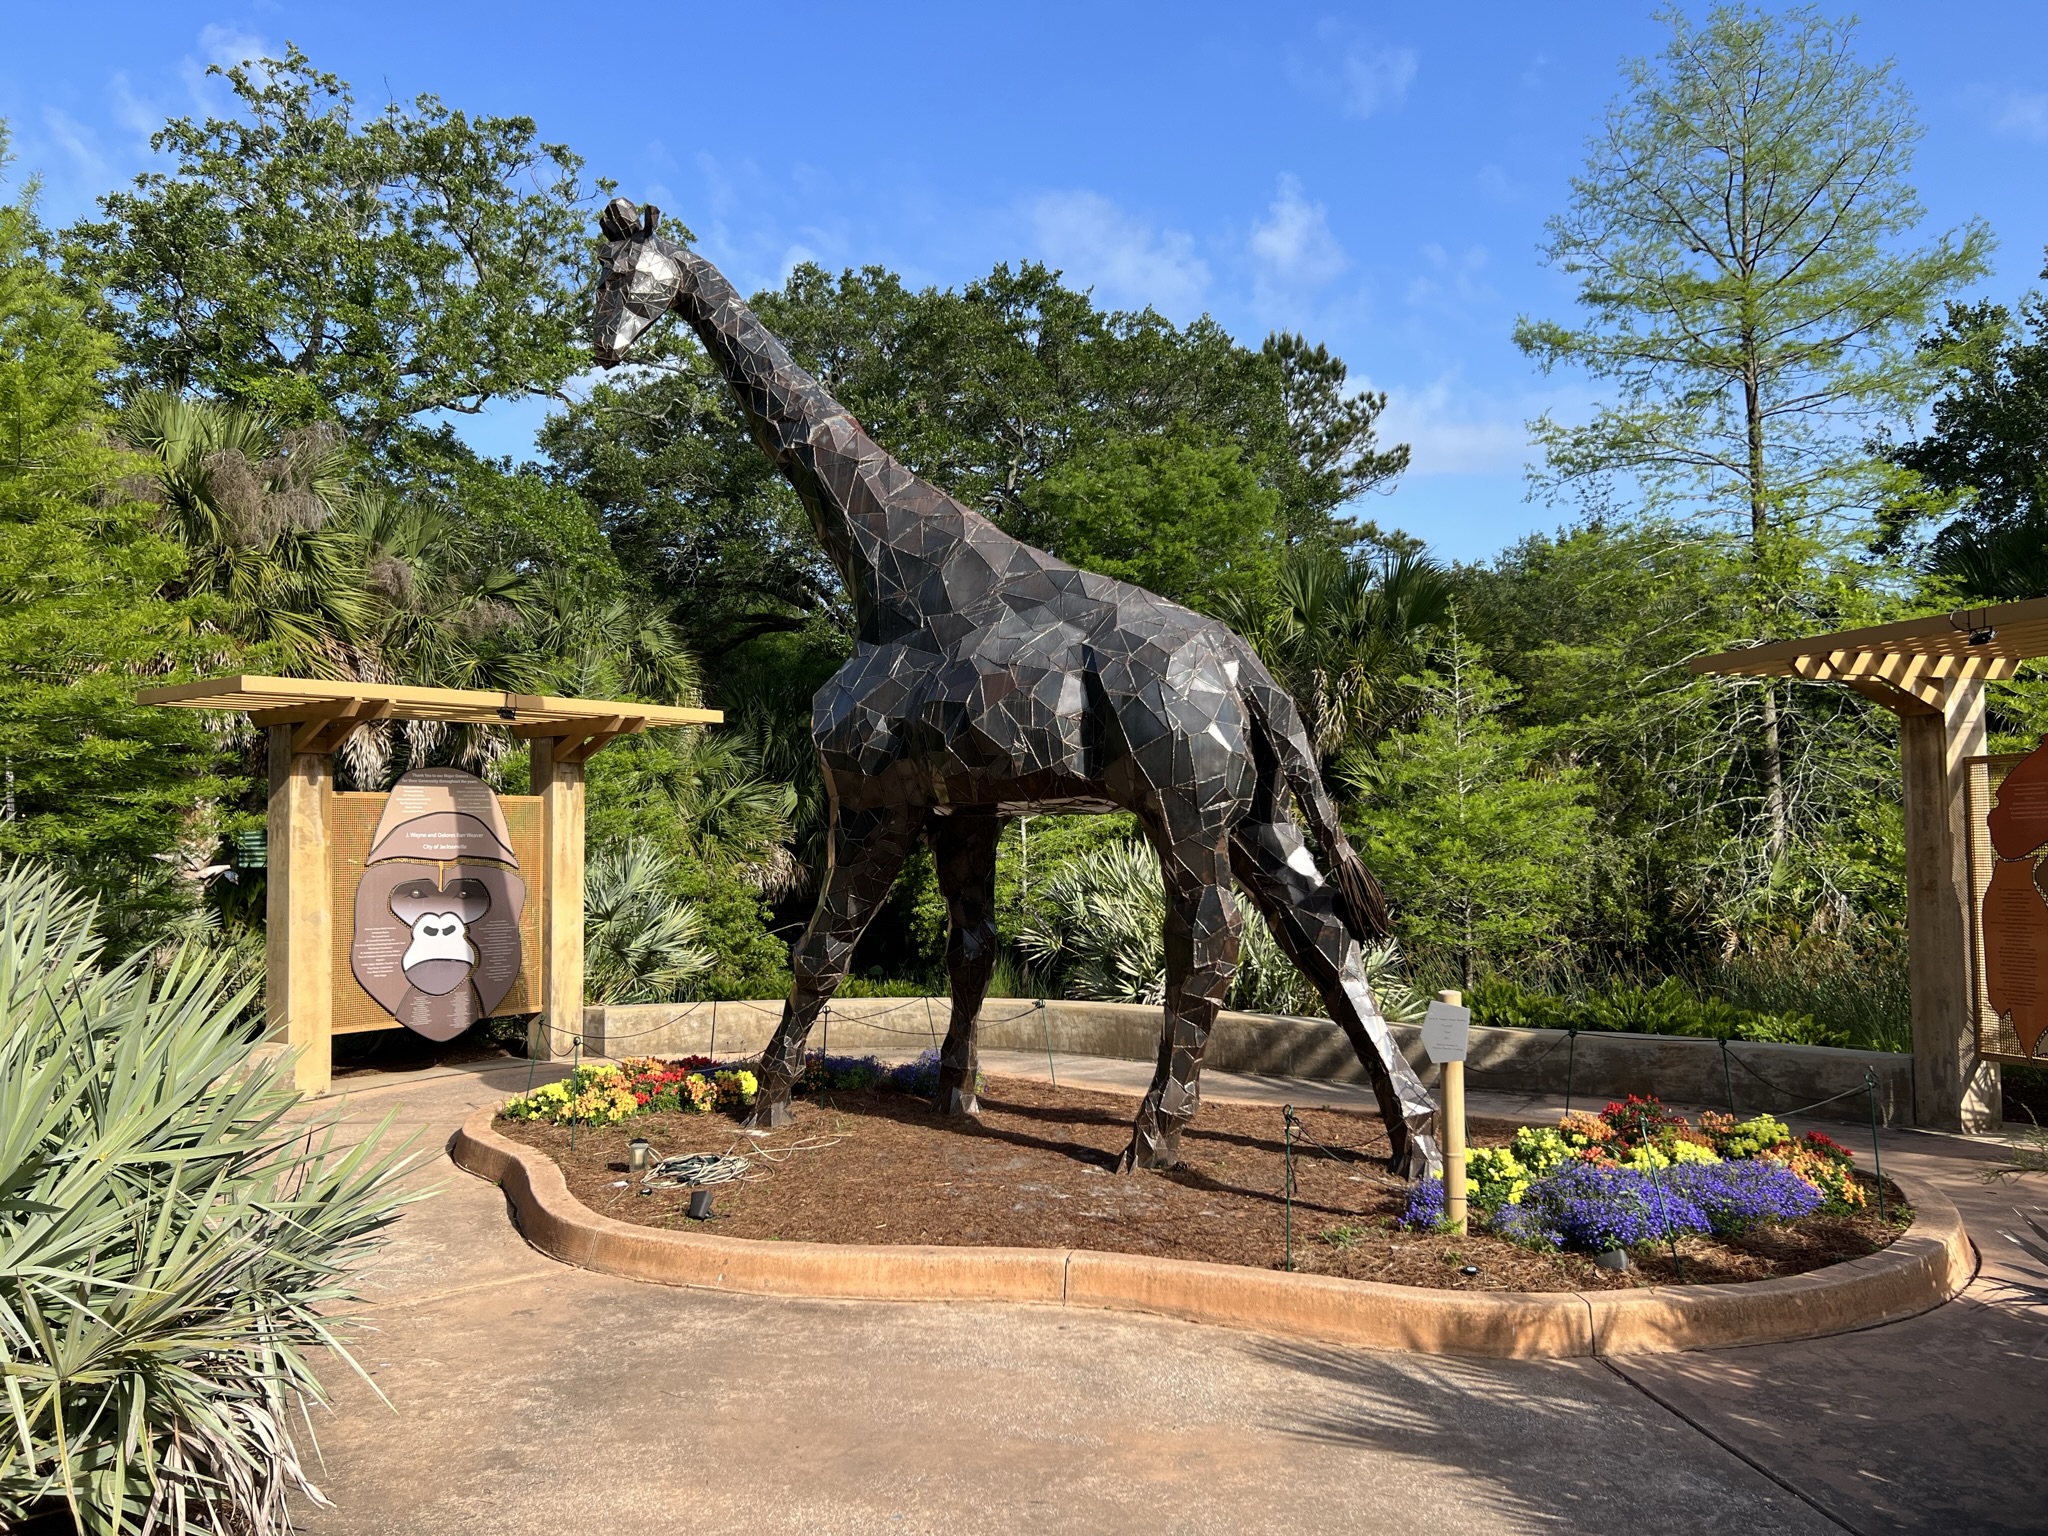 The Jacksonville Zoo: A Perfect Shore Excursion in Florida's Sunshine City